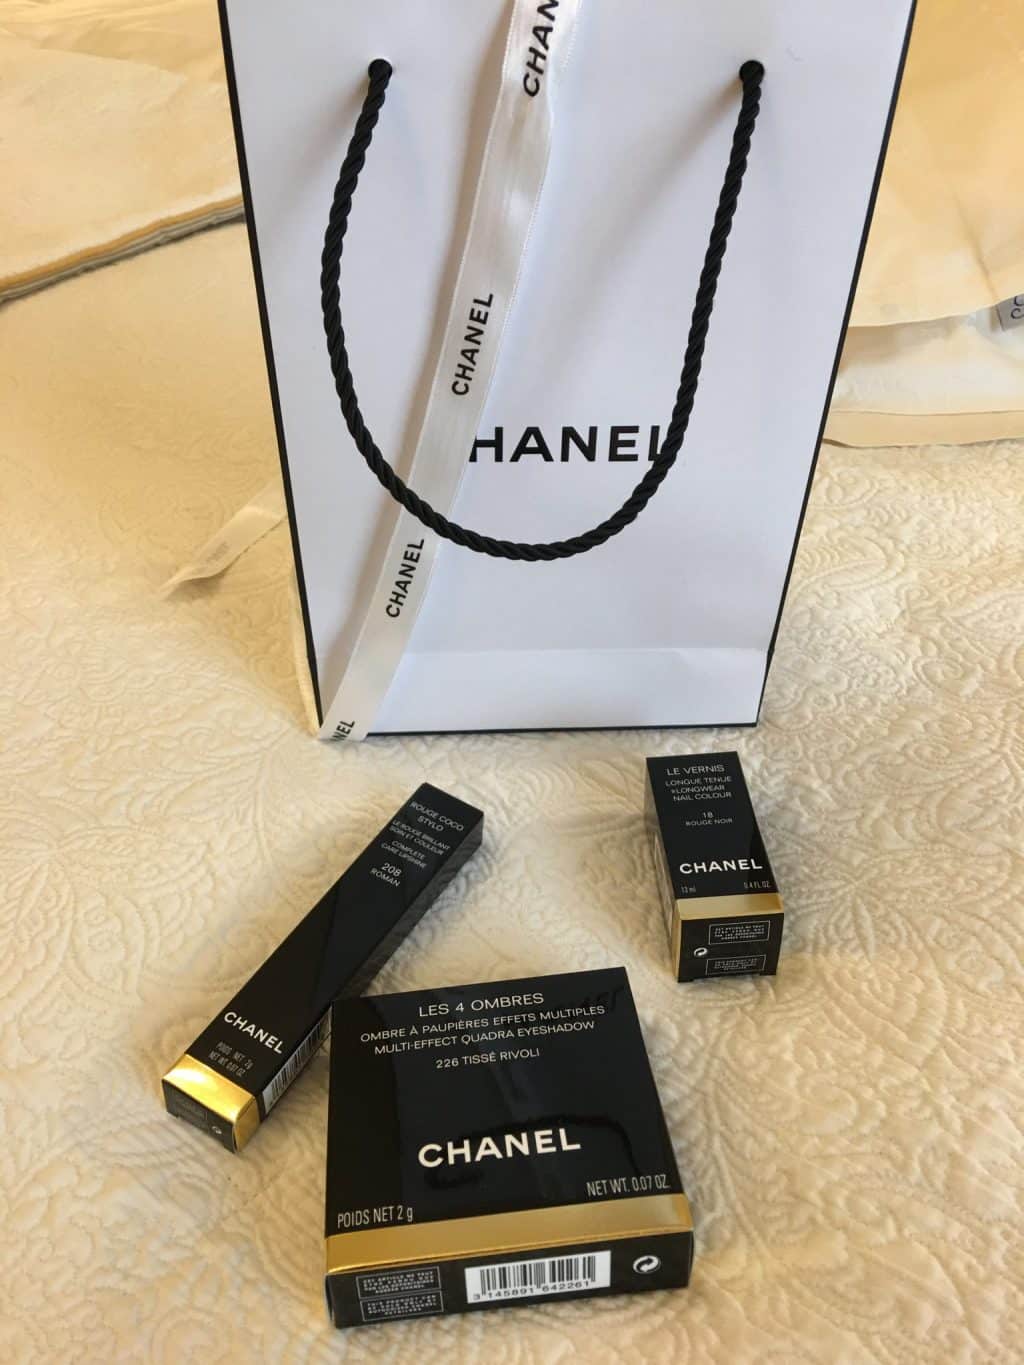 Gifts to go at Chanel Paris